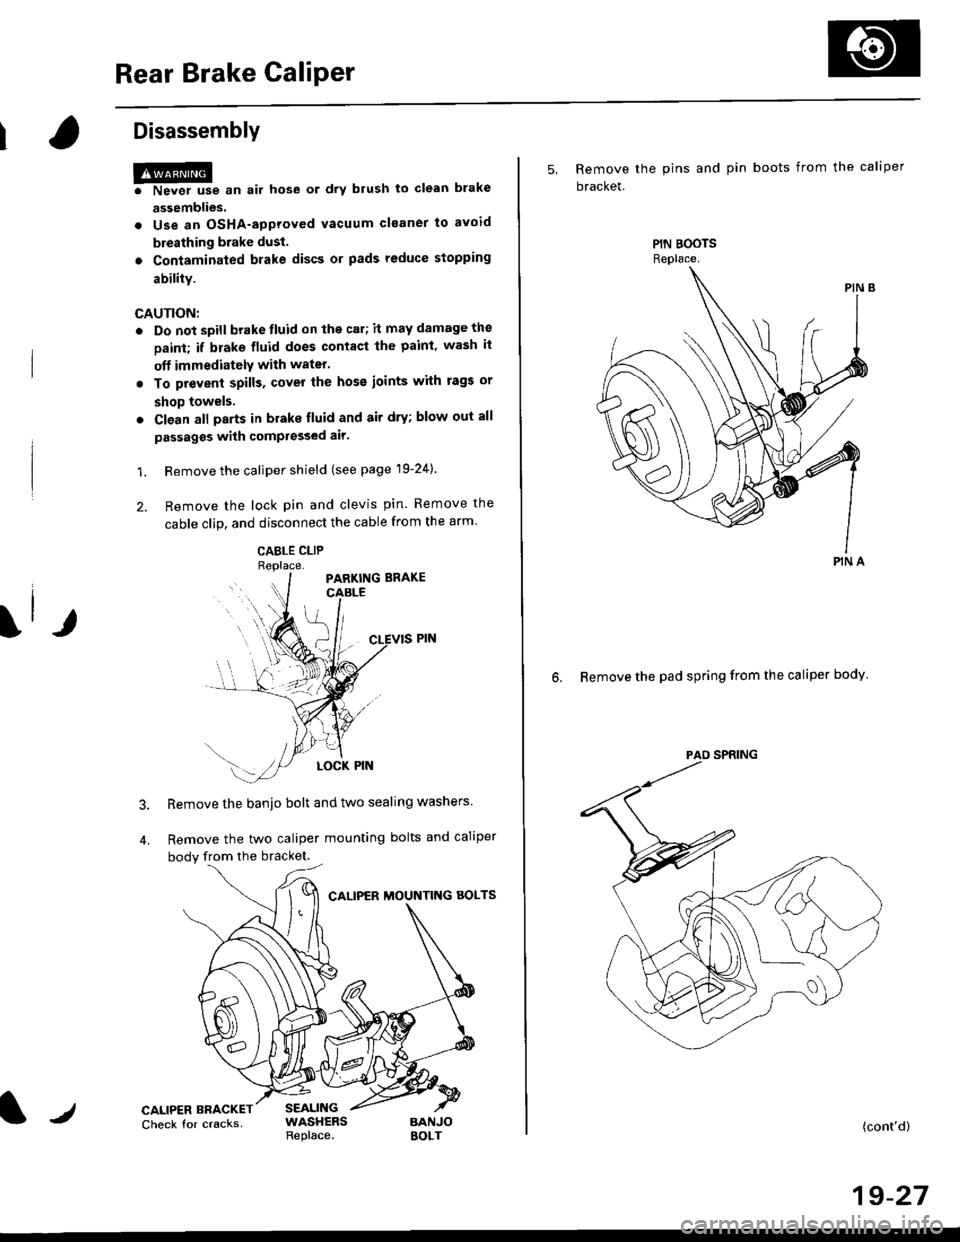 HONDA CIVIC 1997 6.G Owners Guide Rear Brake Caliper
Disassembly
@f l,lever use an air hose or dry brush to clean
assemblies.
. Use an OsHA-approved vacuum cleaner to
brake
avoid
breathing brake dust.
. Contaminated brake discs or pa